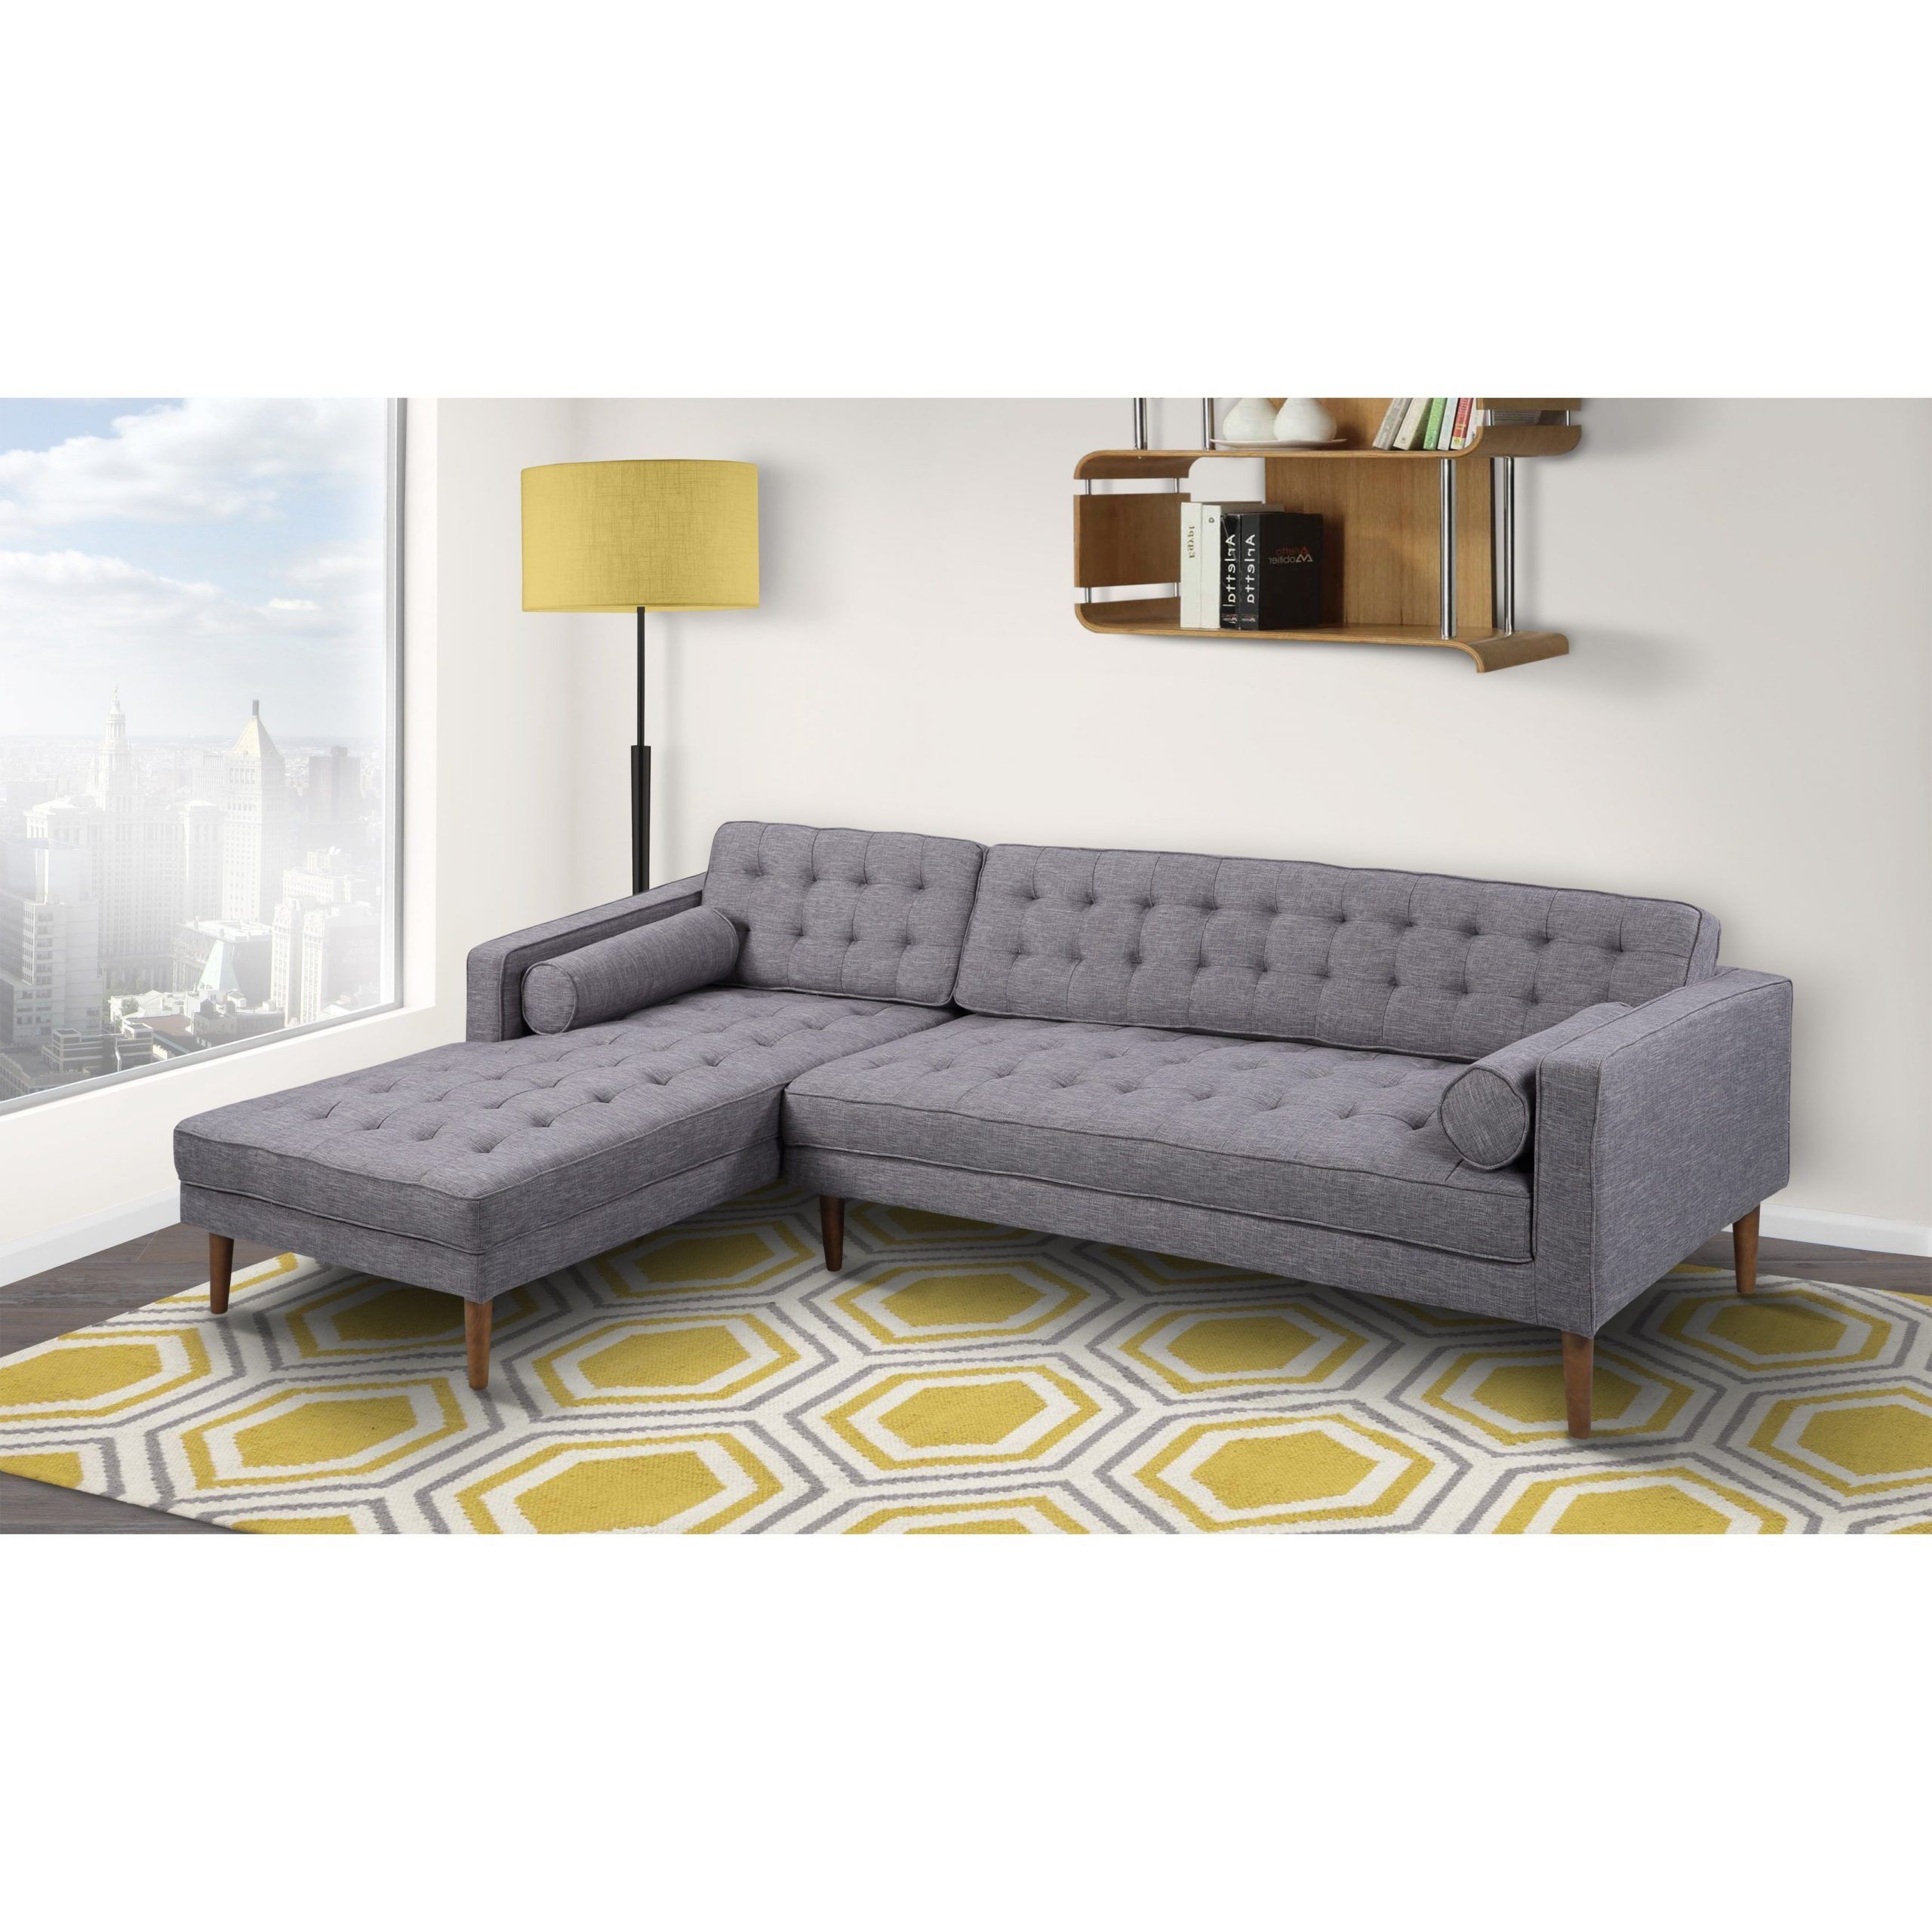 Armen Living Element Tufted Dark Grey Linen Sectional Sofa Throughout Most Up To Date Element Left Side Chaise Sectional Sofas In Dark Gray Linen And Walnut Legs (Photo 4 of 25)